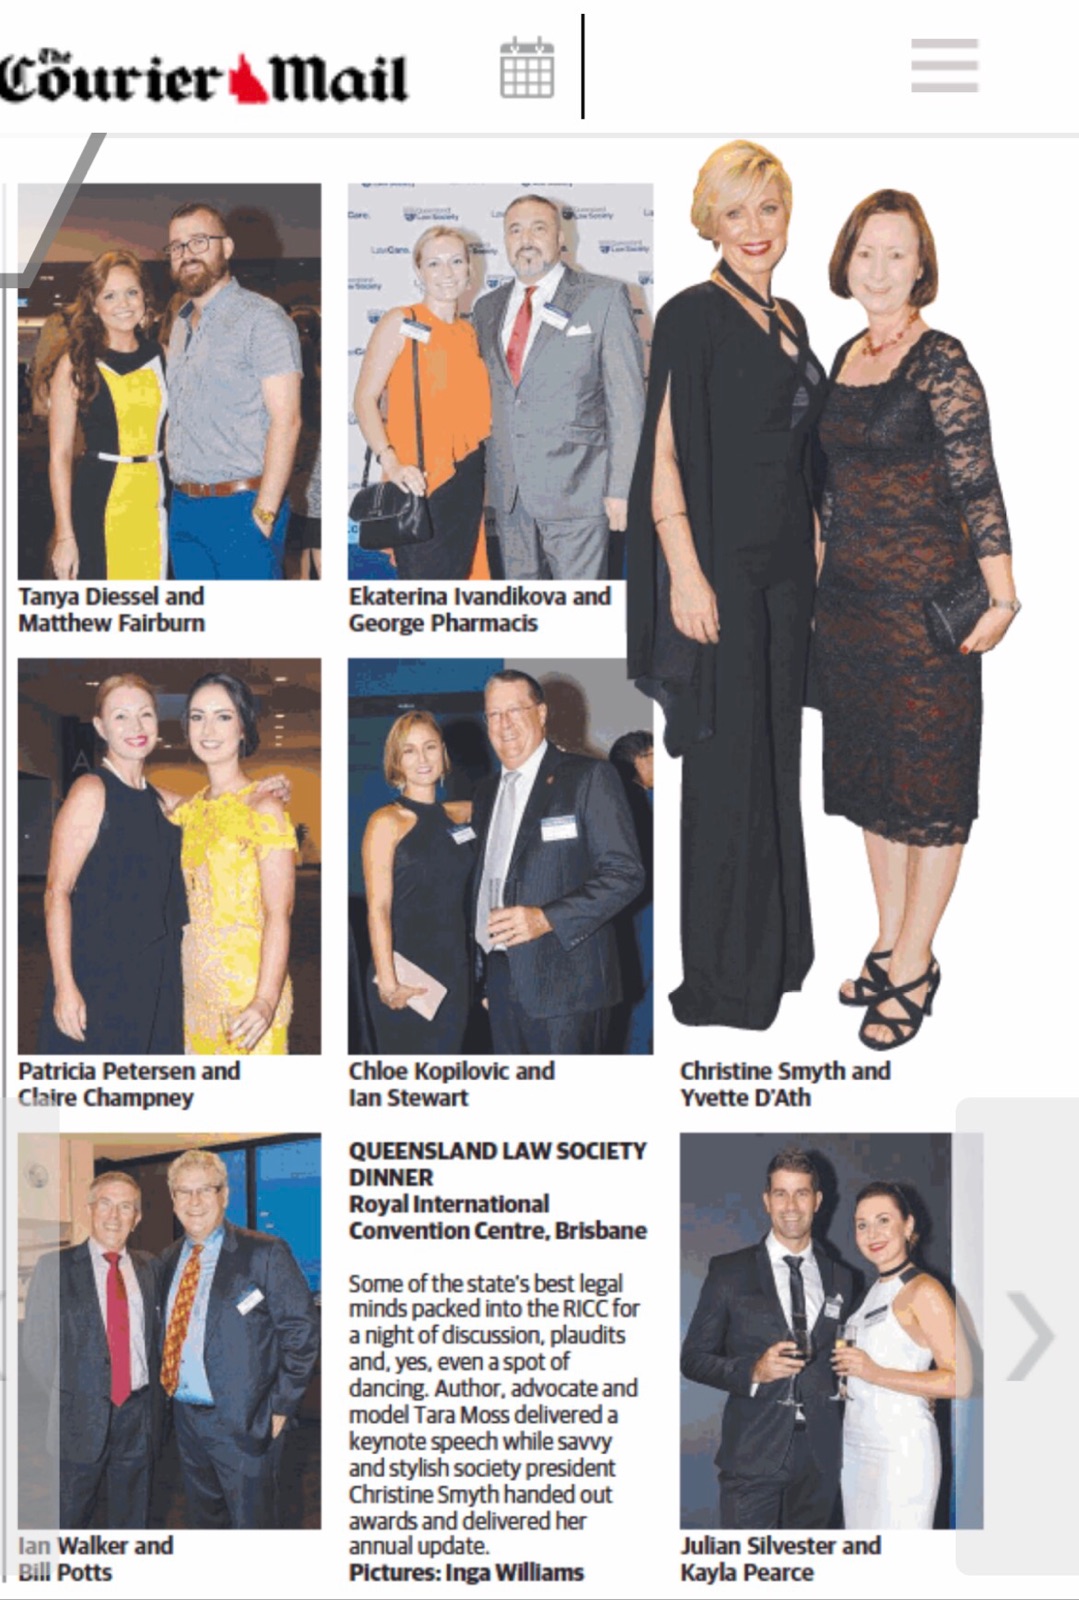 Courier Mail reports on the Queensland Law Society Dinner